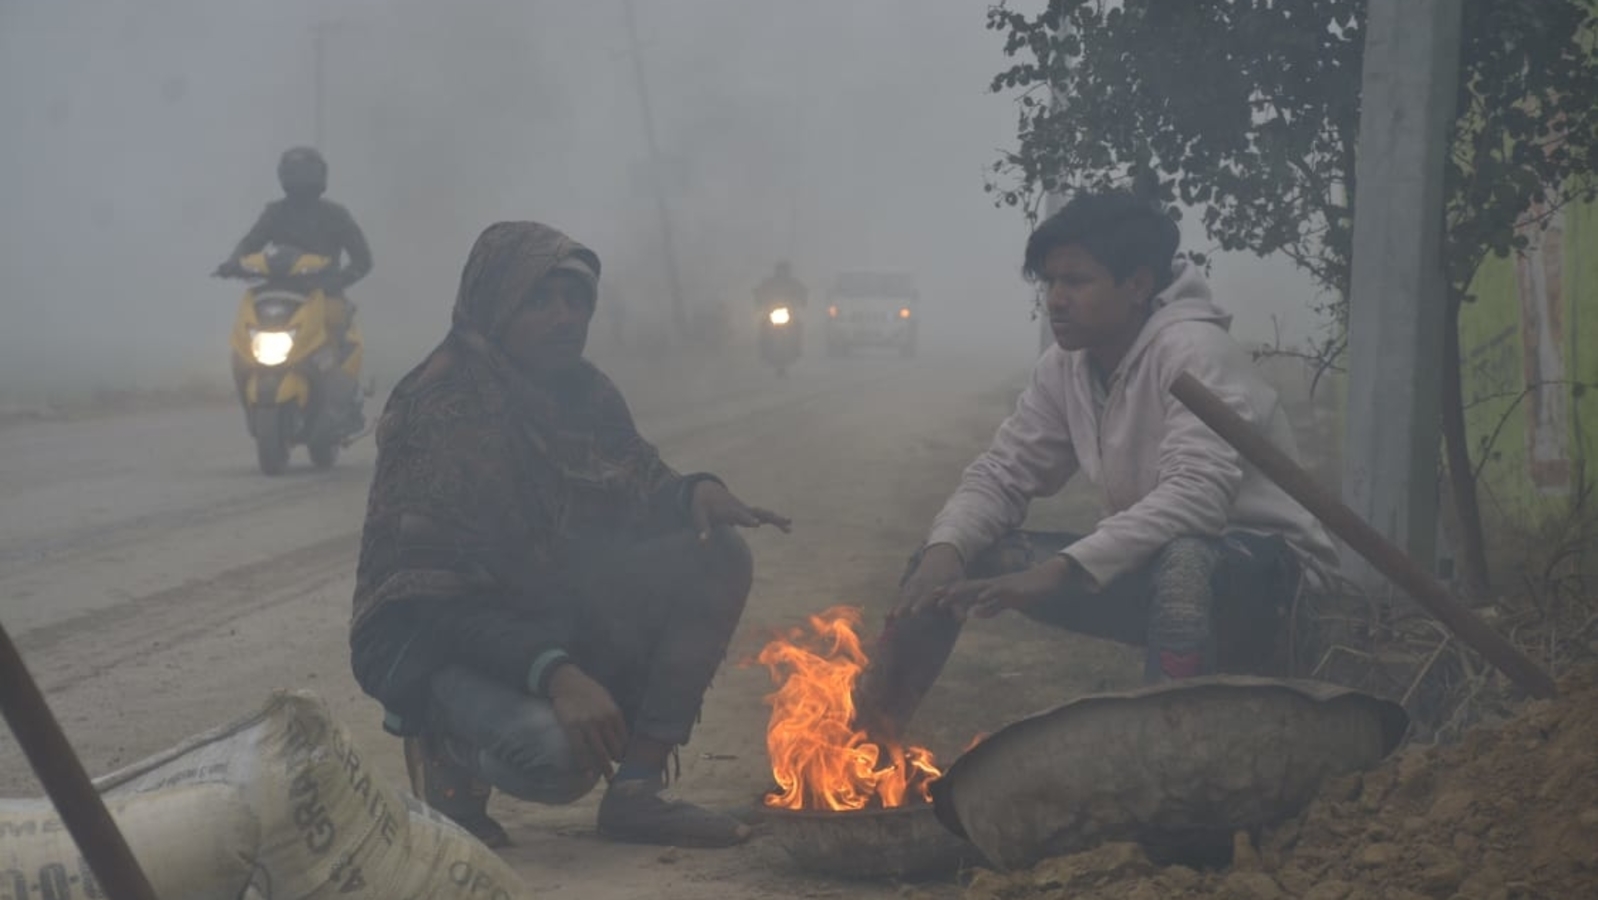 Night temperatures rise in parts of Rajasthan as cold wave conditions ease | Latest News India - Hindustan Times